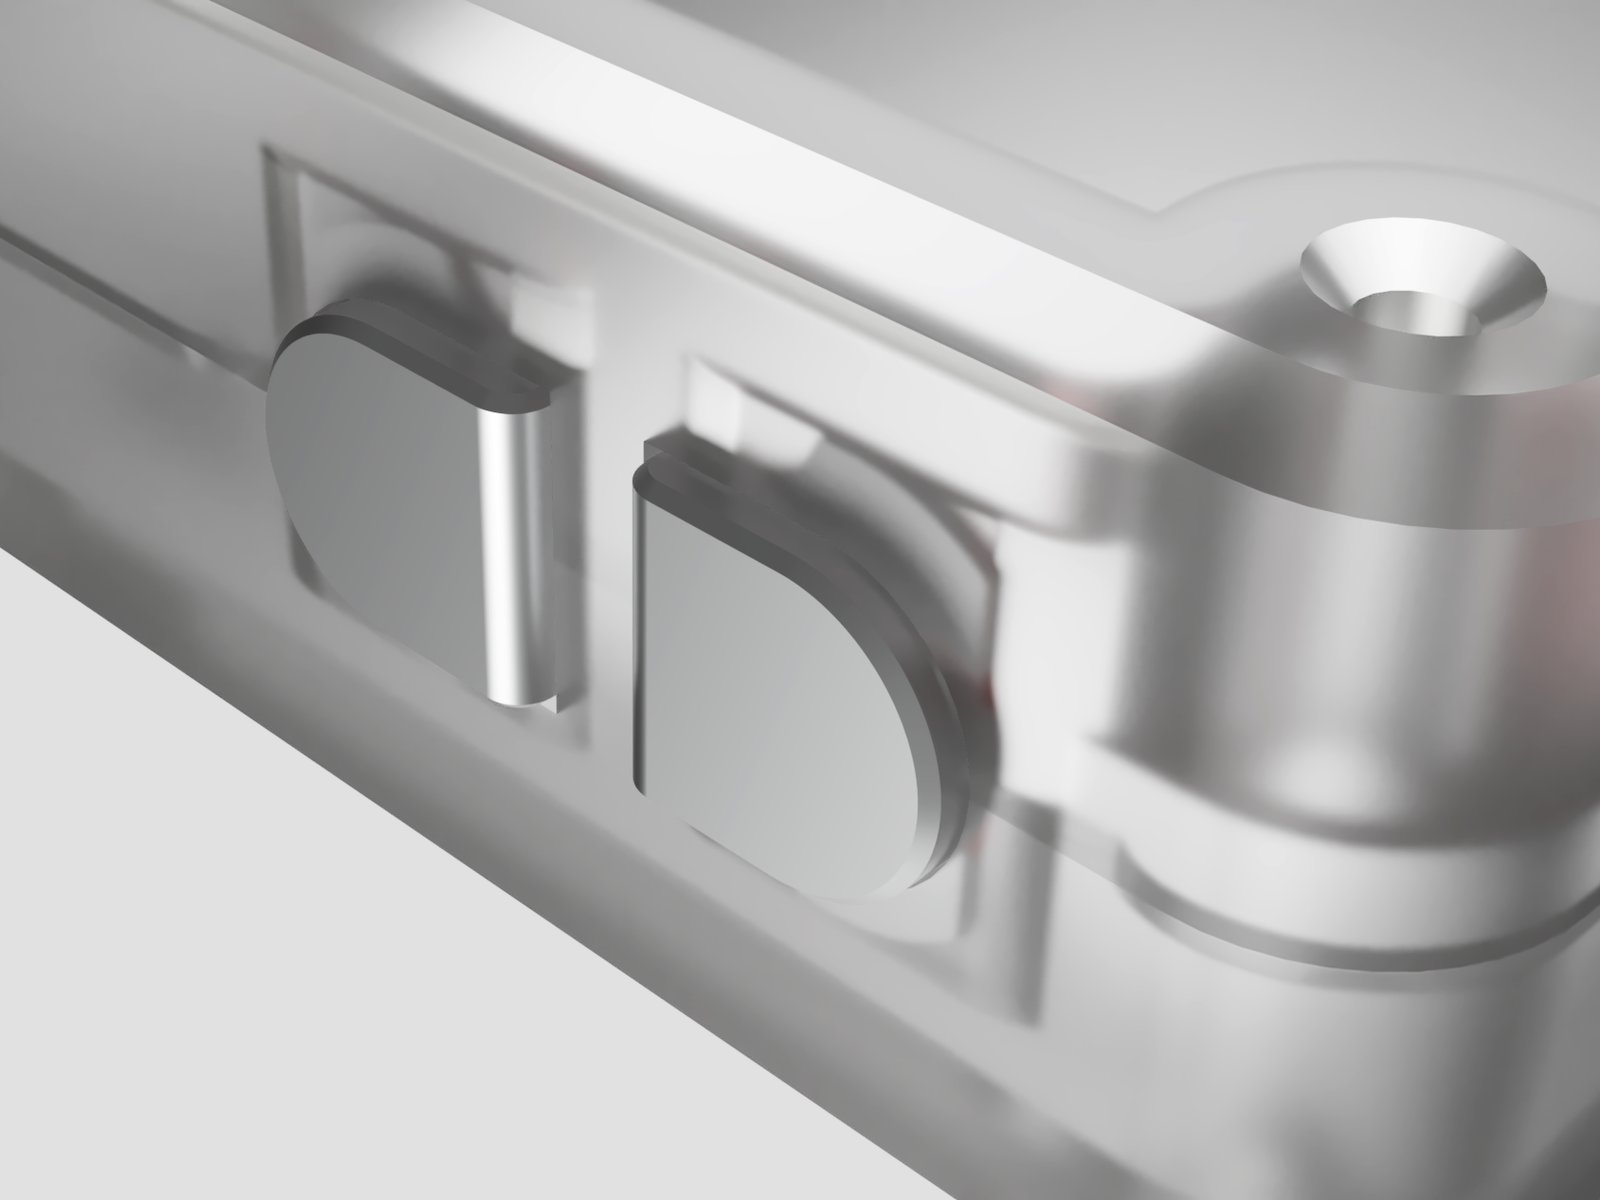 A close up render of the buttons when assembled